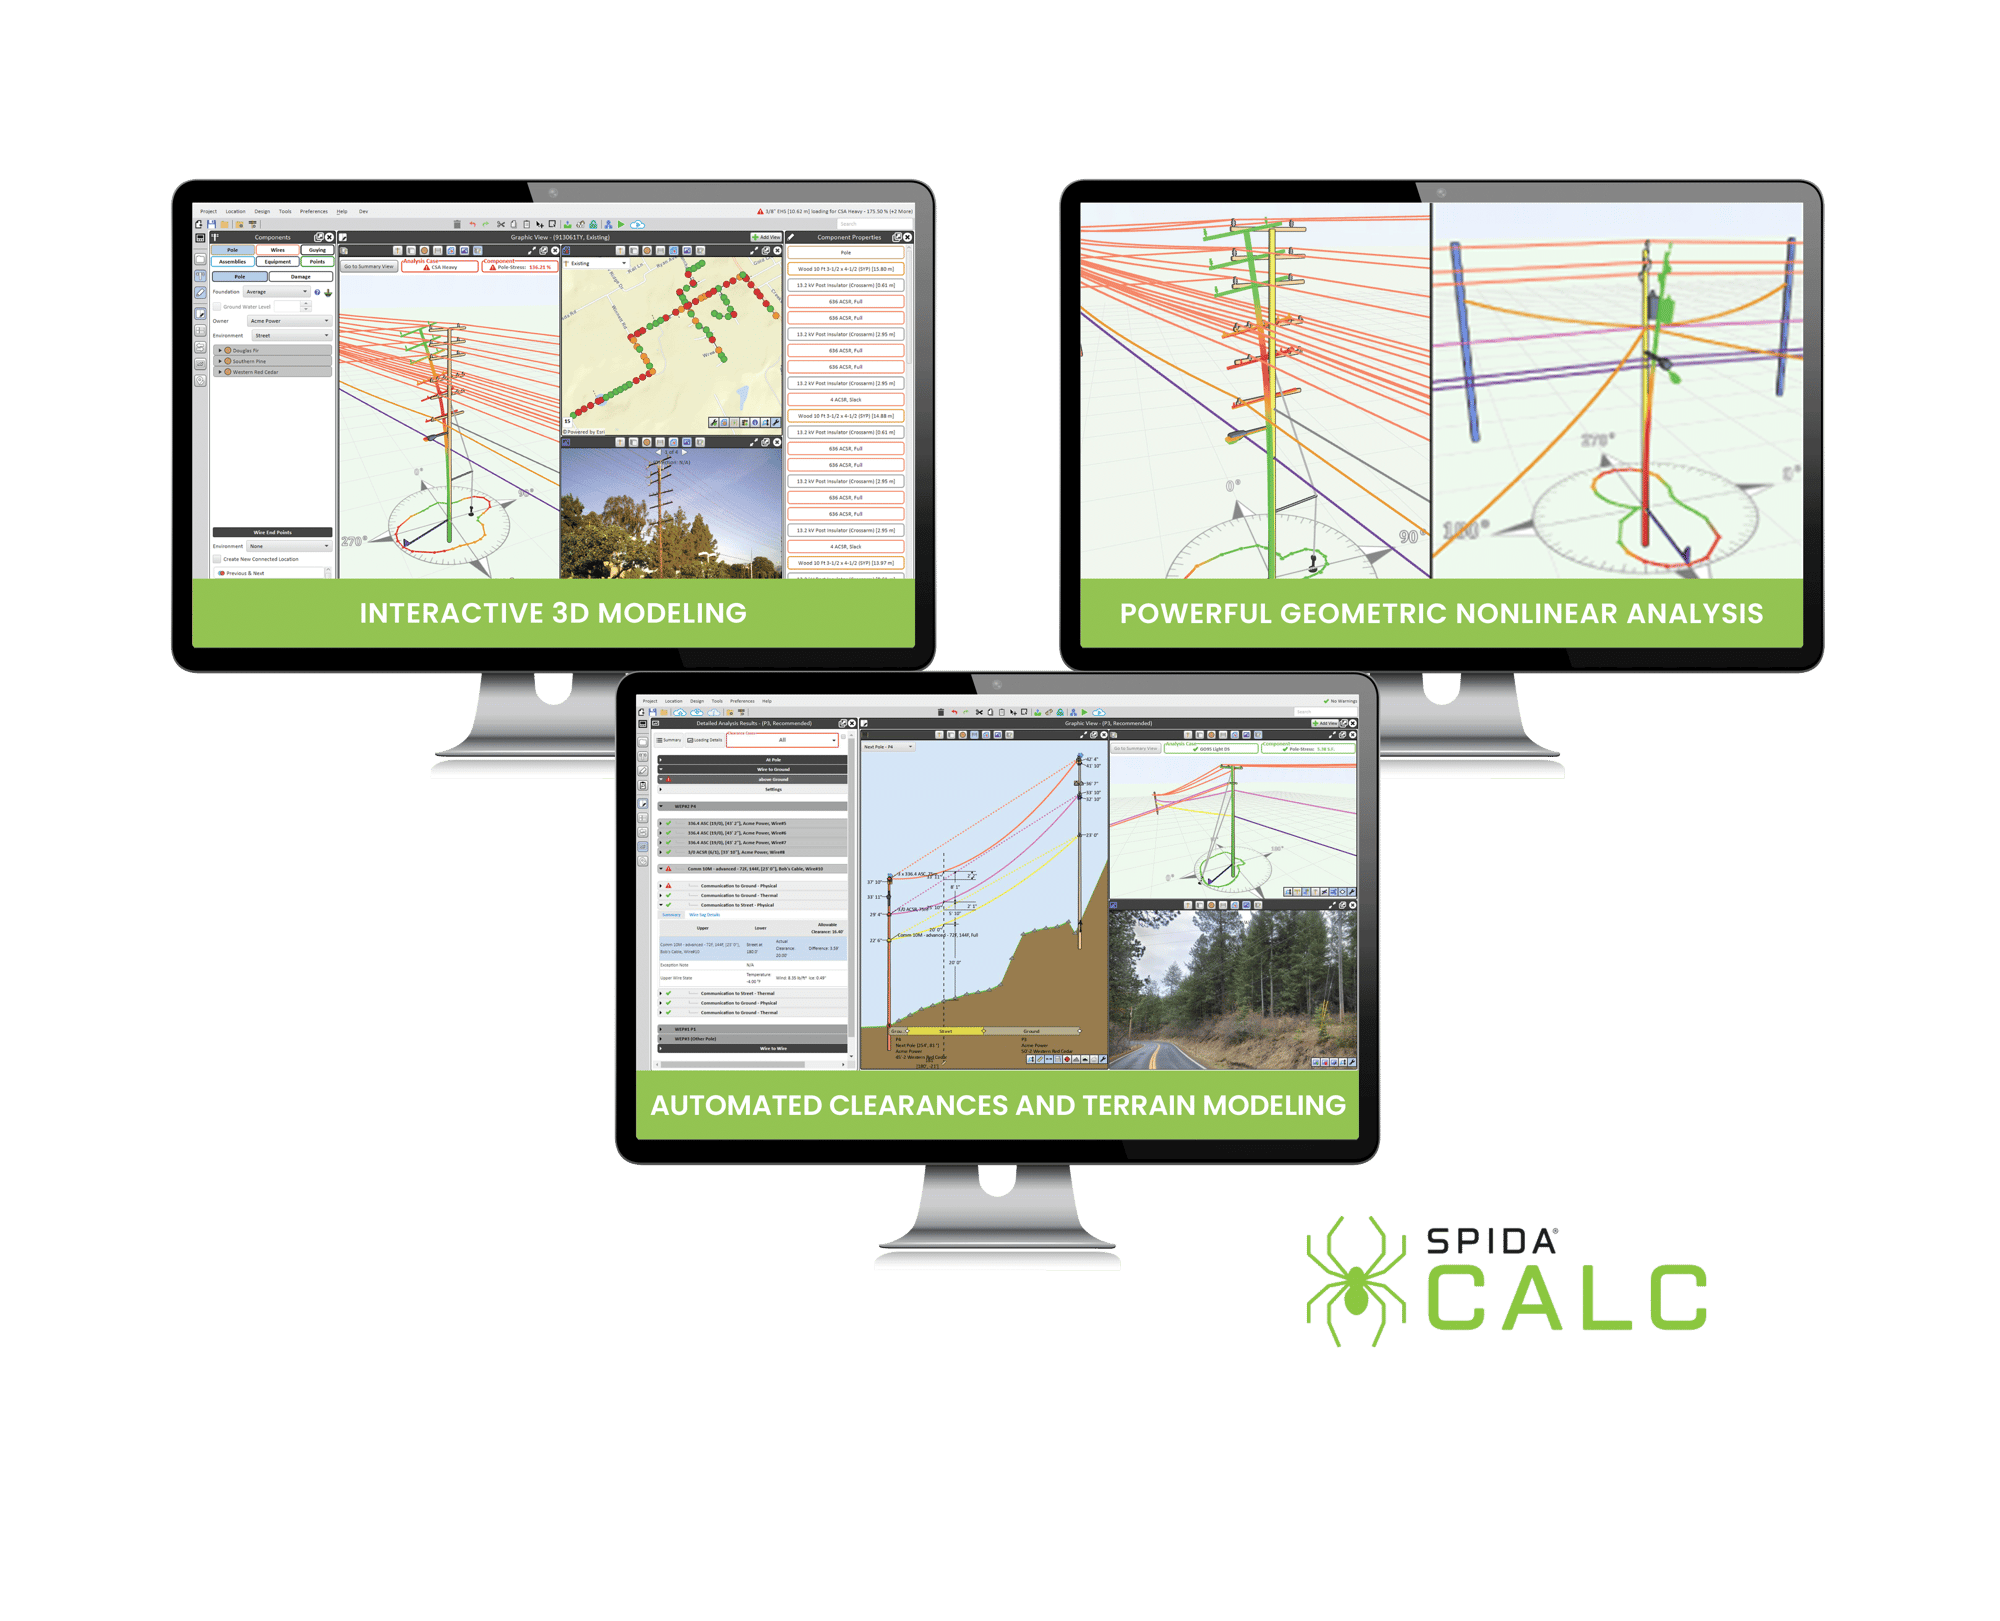 SPIDAcalc features interactive 3d modeling, powerful geometric nonlinear analysis,  automated clearances, and terrain modeling, 